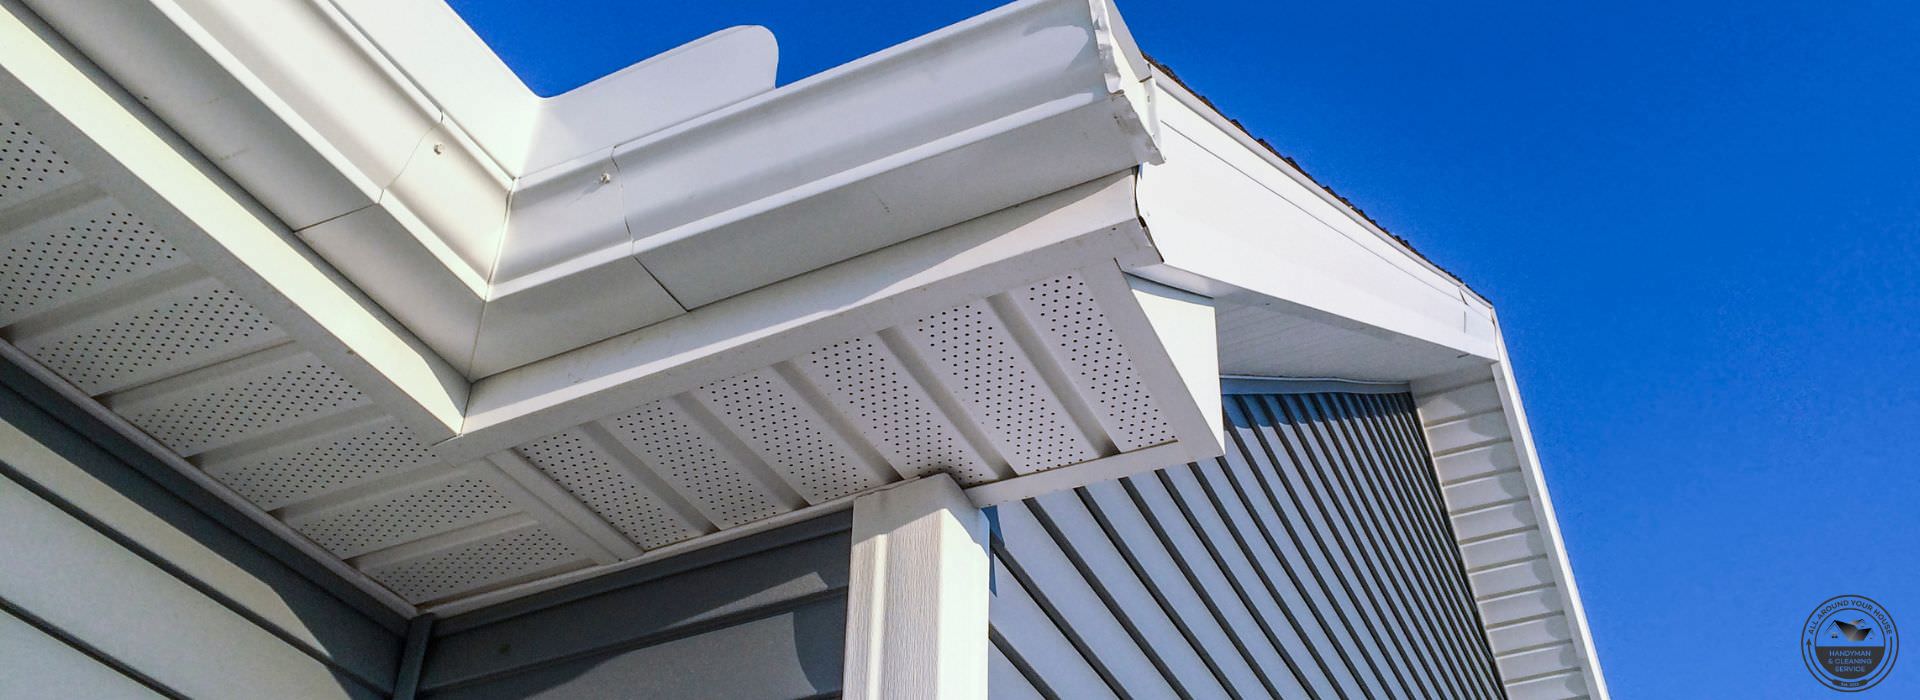 gutter cleaning services - new port richey in florida - all around your house llc